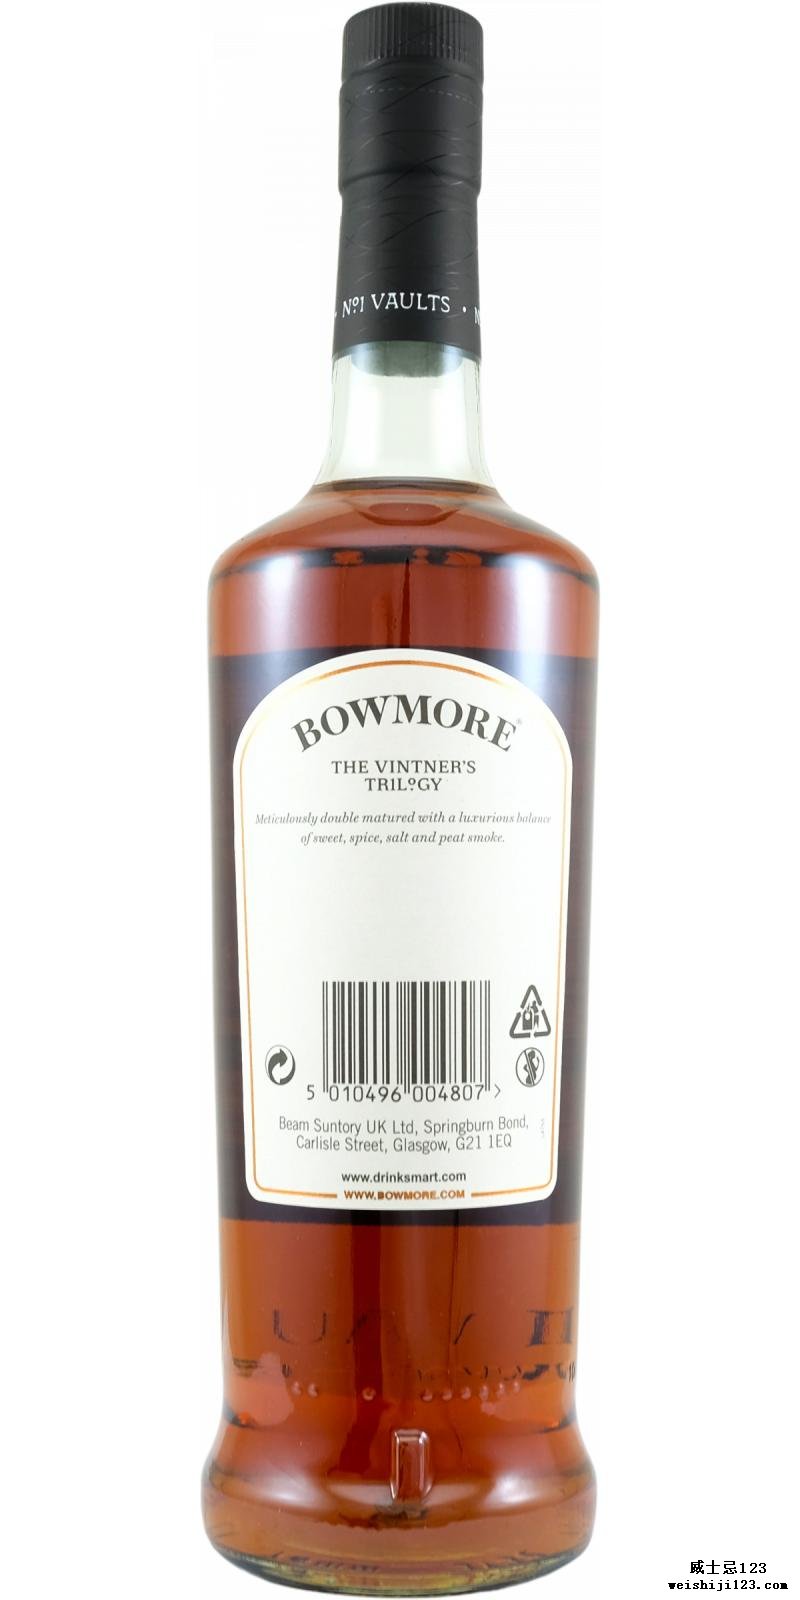 Bowmore 27-year-old